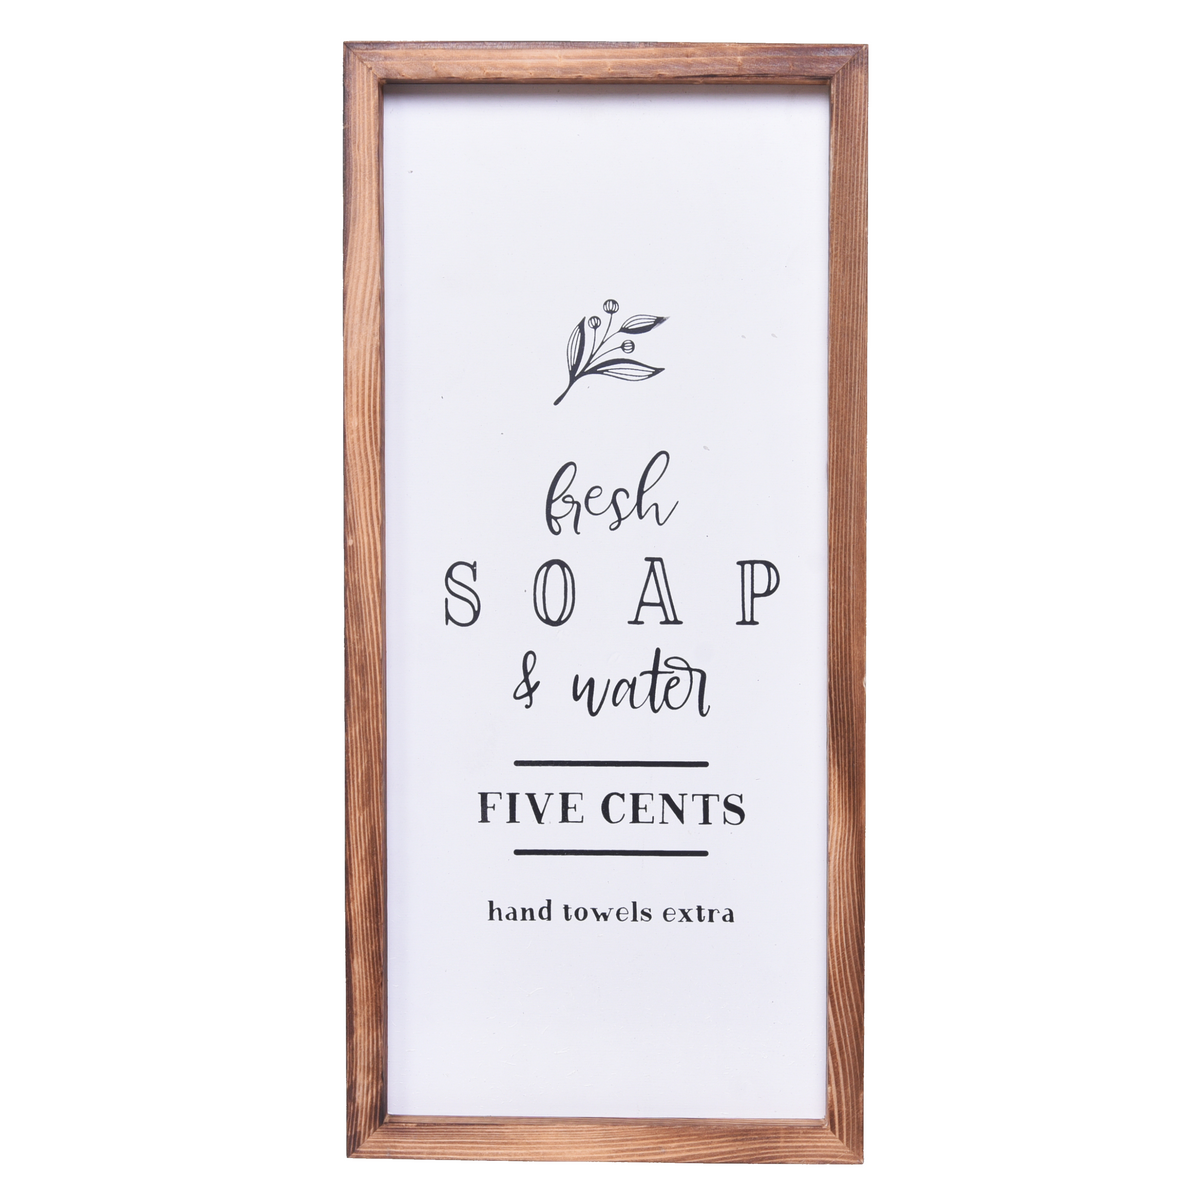 Wooden Bathroom 6x6 Block Shelf Decor (Fresh Soap & Water) Inspirational Plaque Tabletop and Family Home Decoration Distressed White